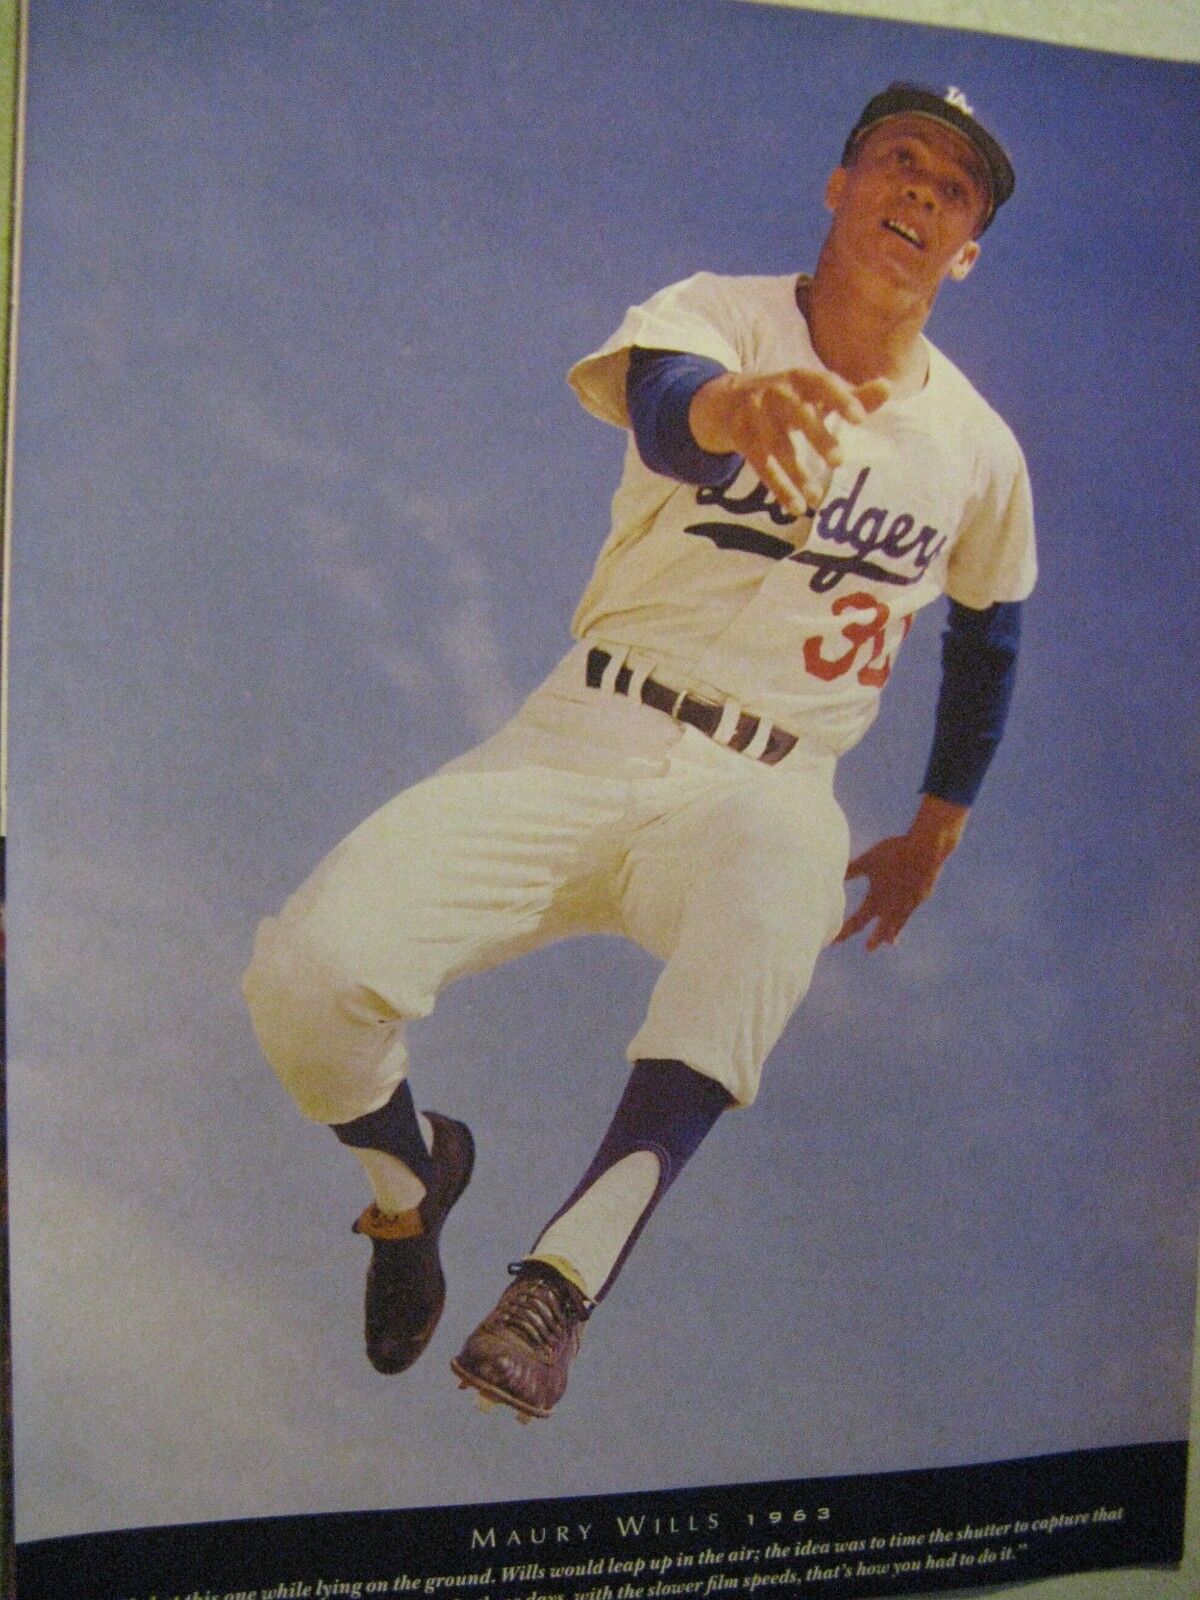 1991 Maury Wills 1 Page Magazine Picture-8.5 x 10.5\